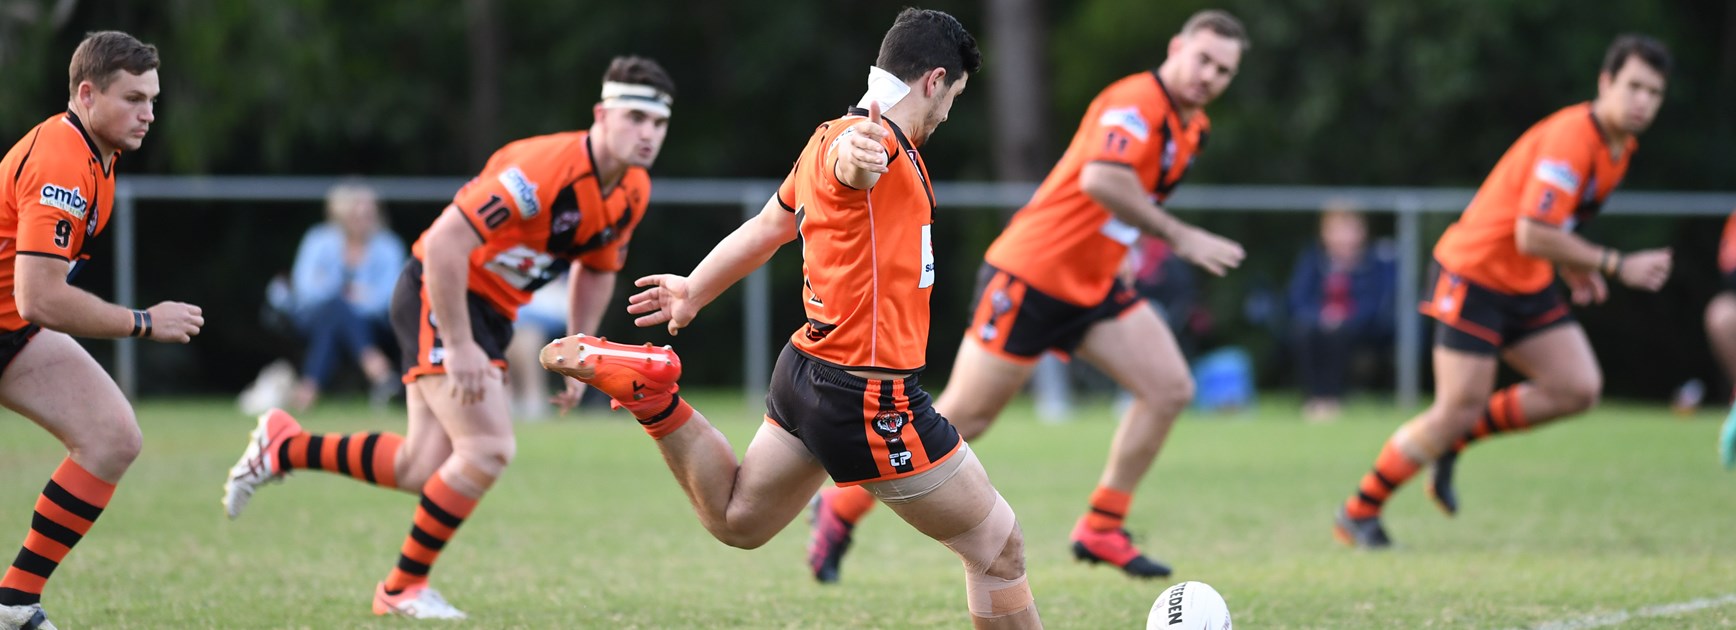 Tigers and Seagulls battle to wrap up finals place